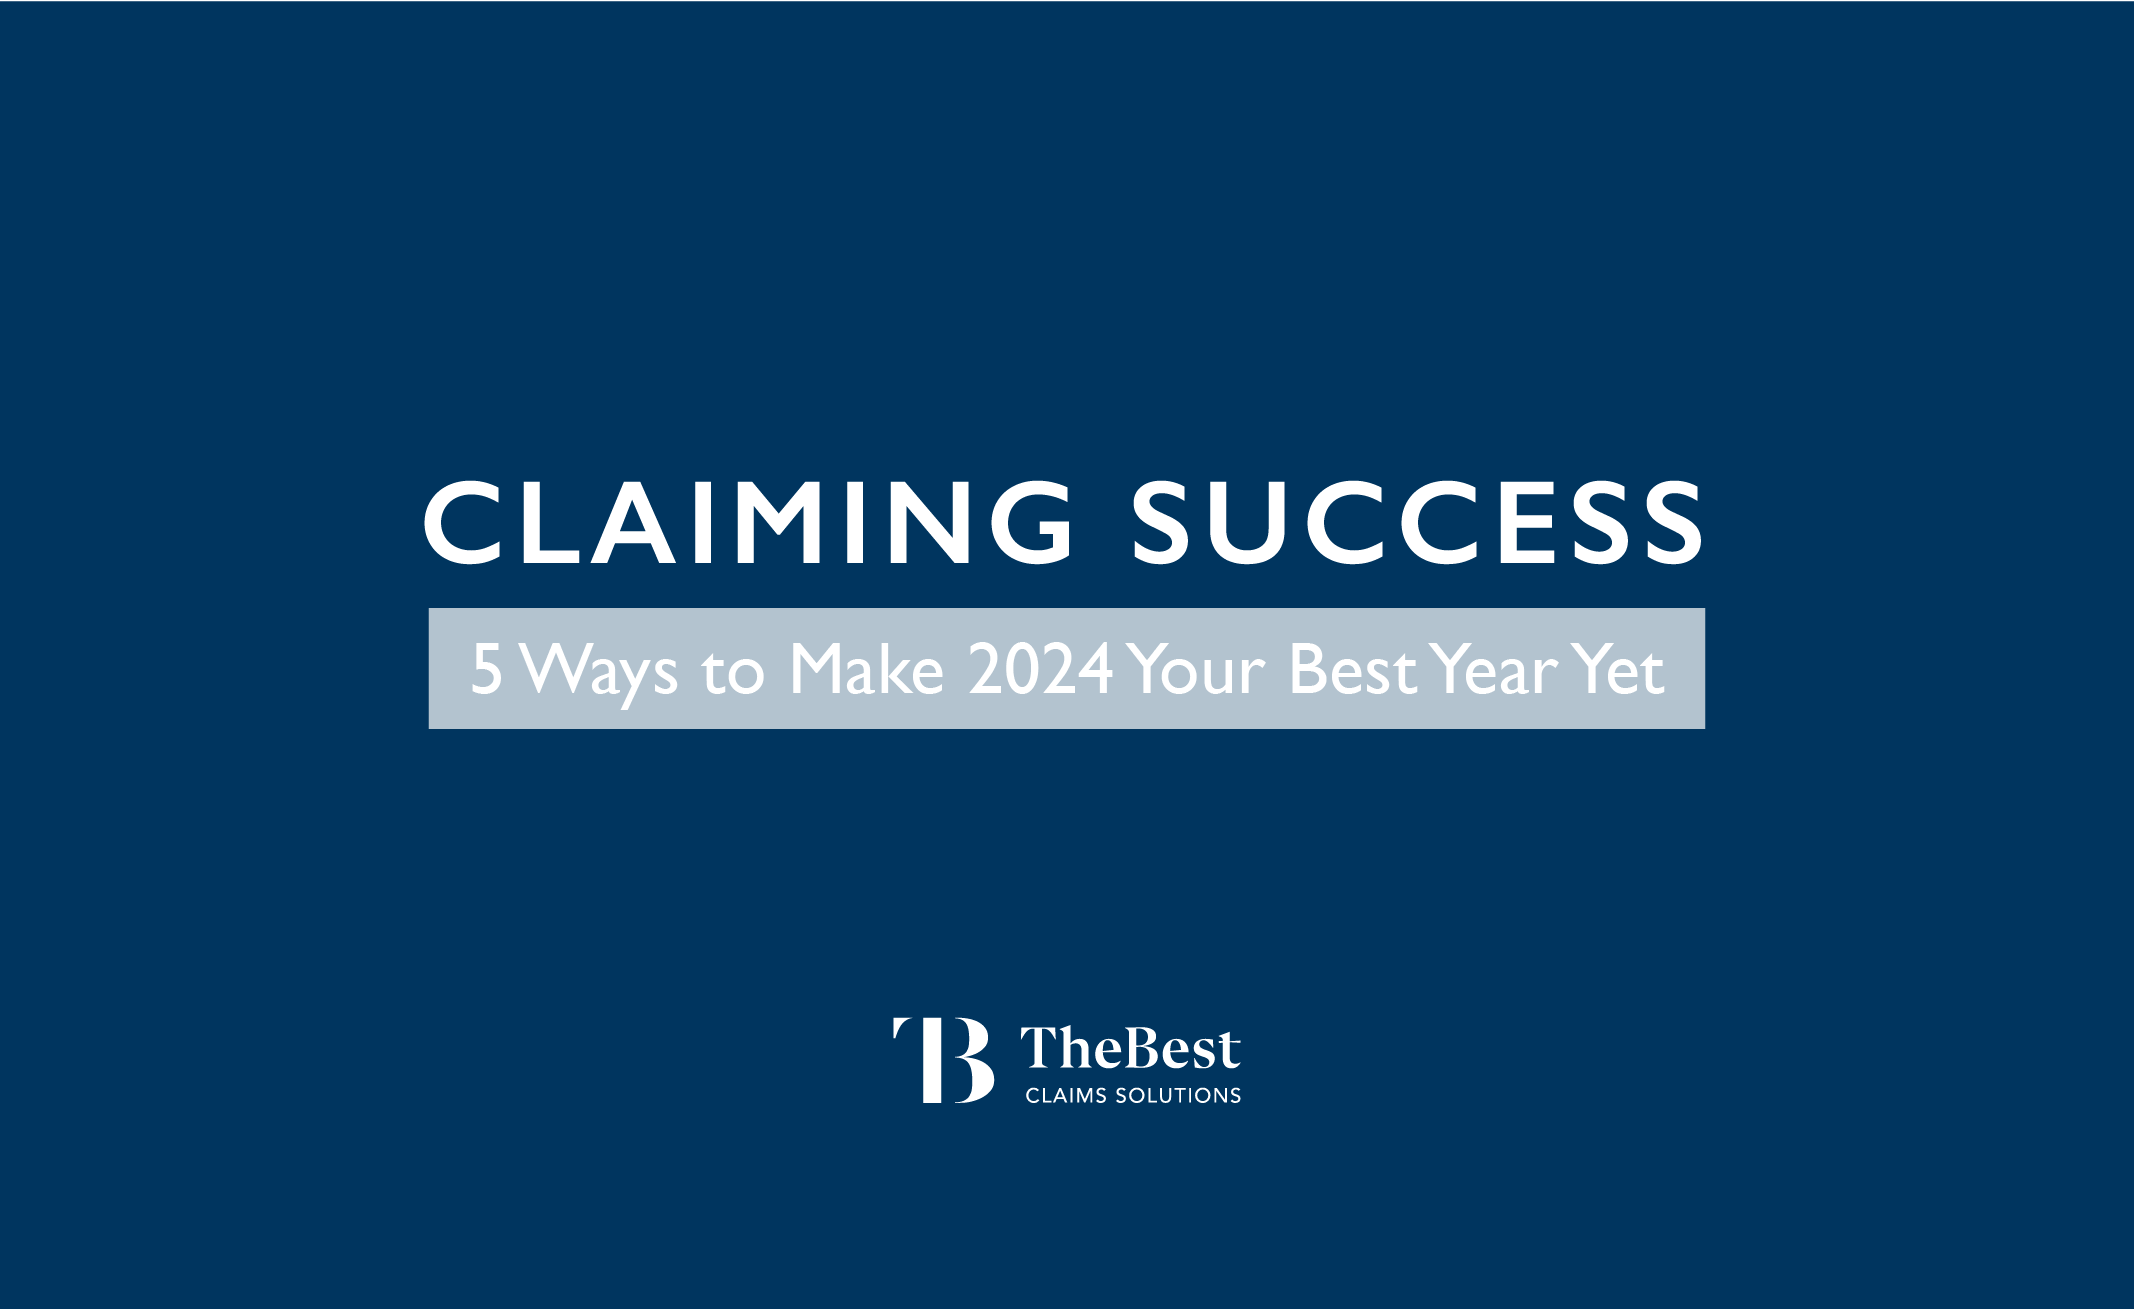 5 ways to make 2024 your best year yet